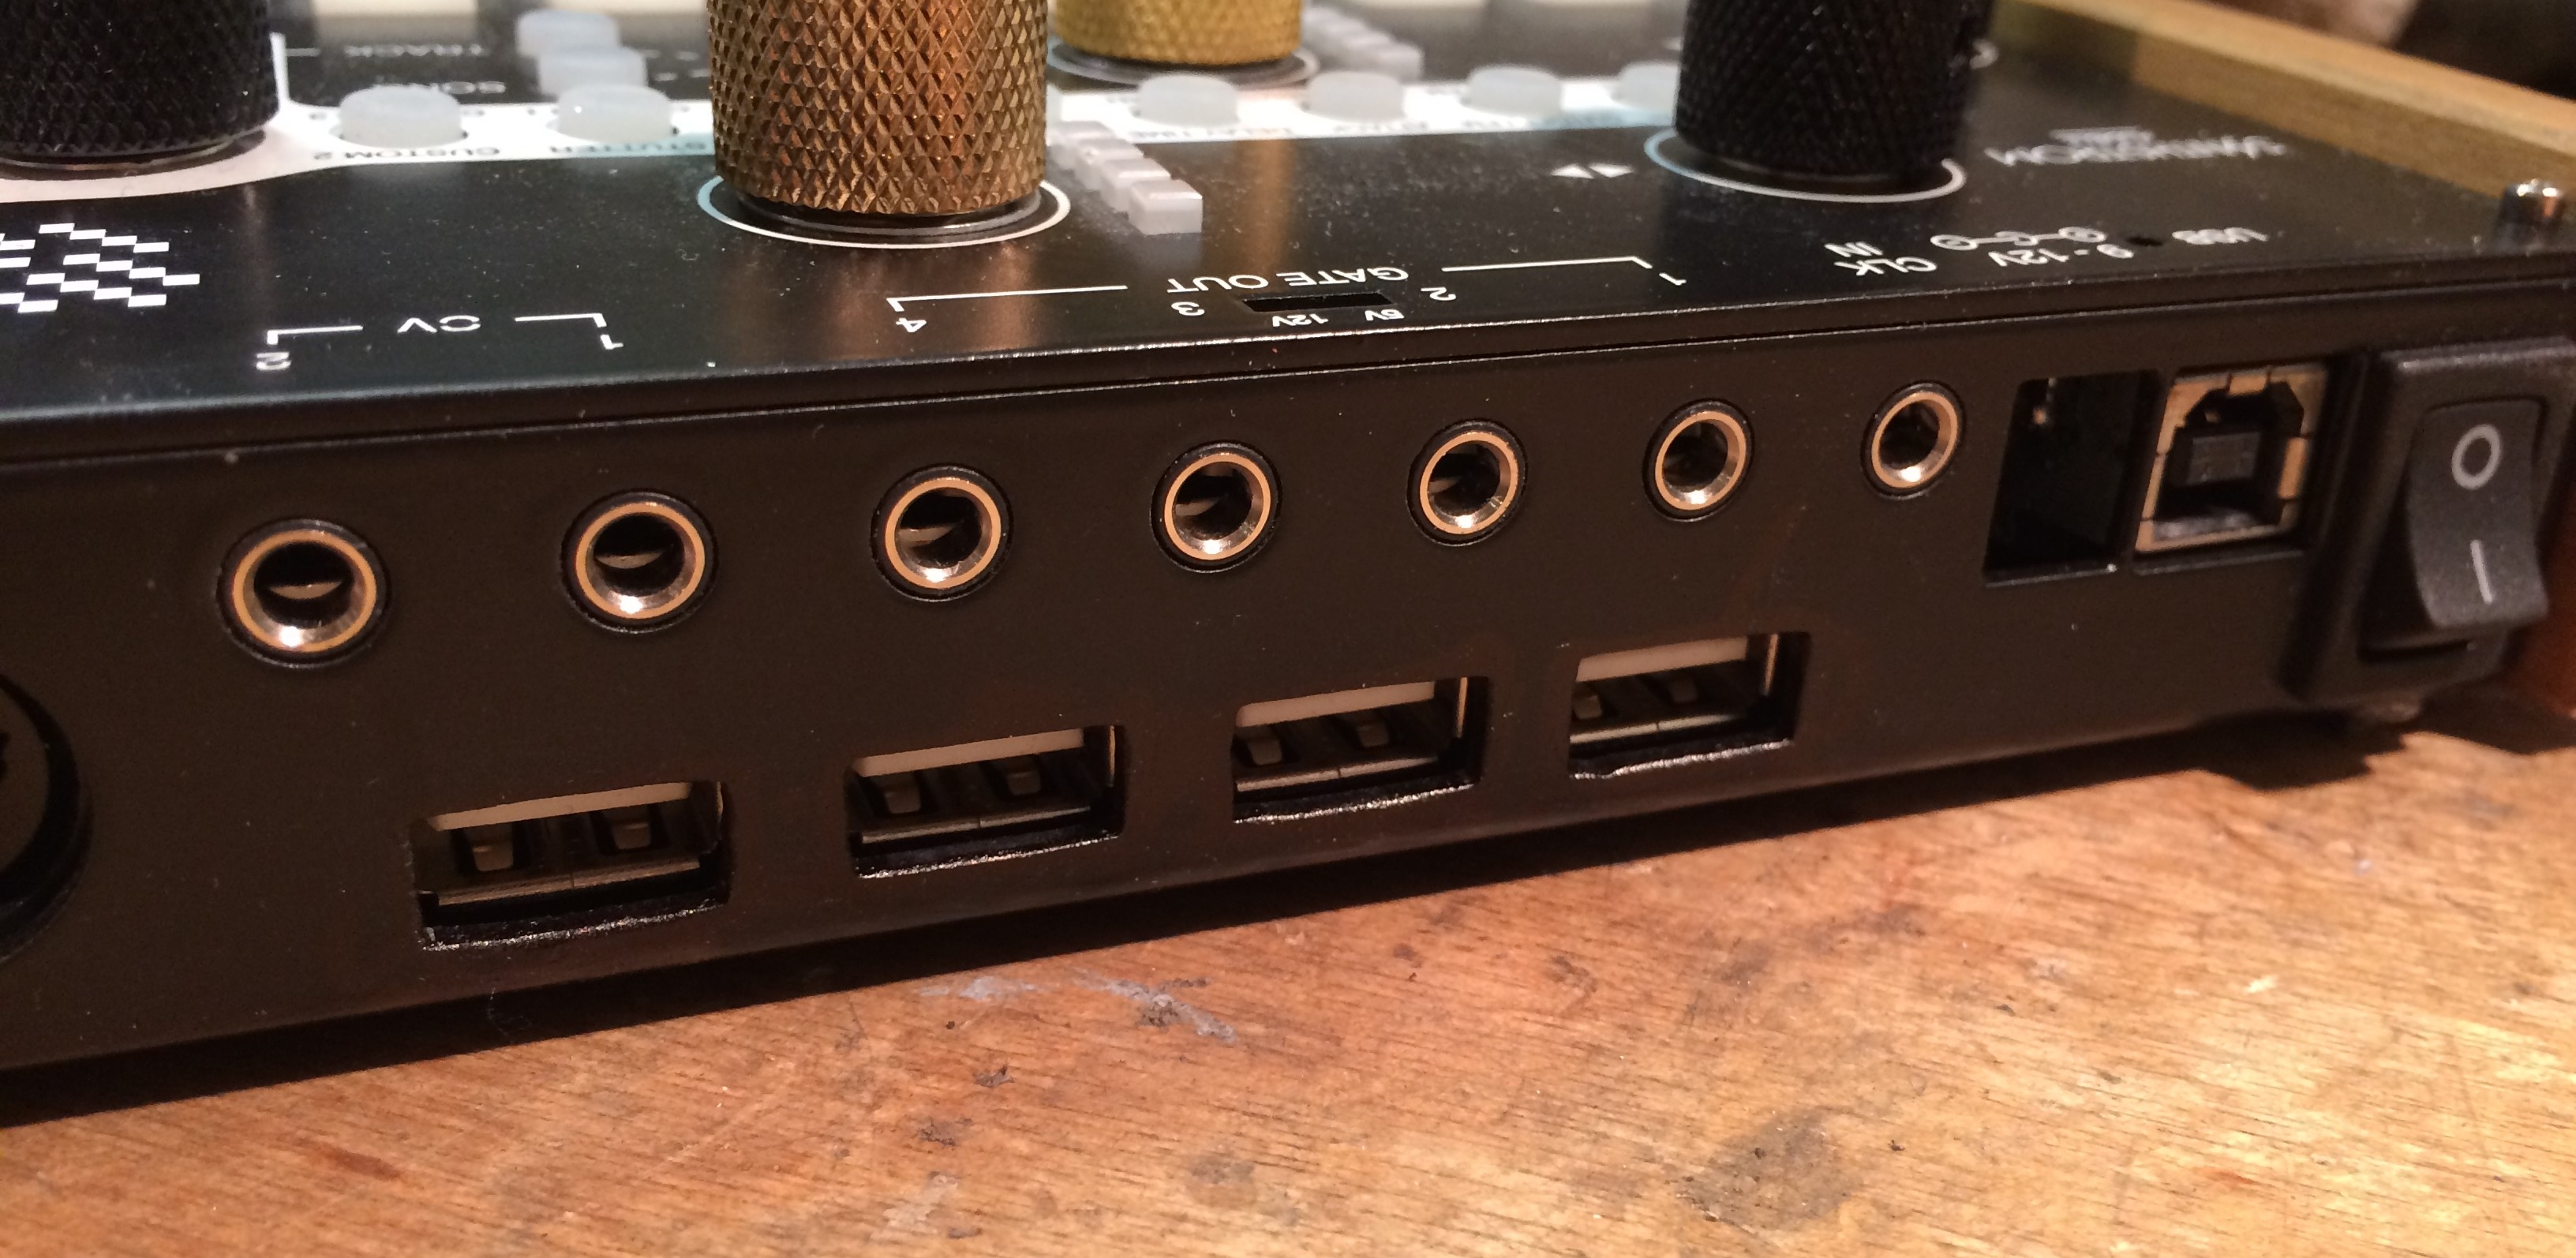 Perspective view of USB ports